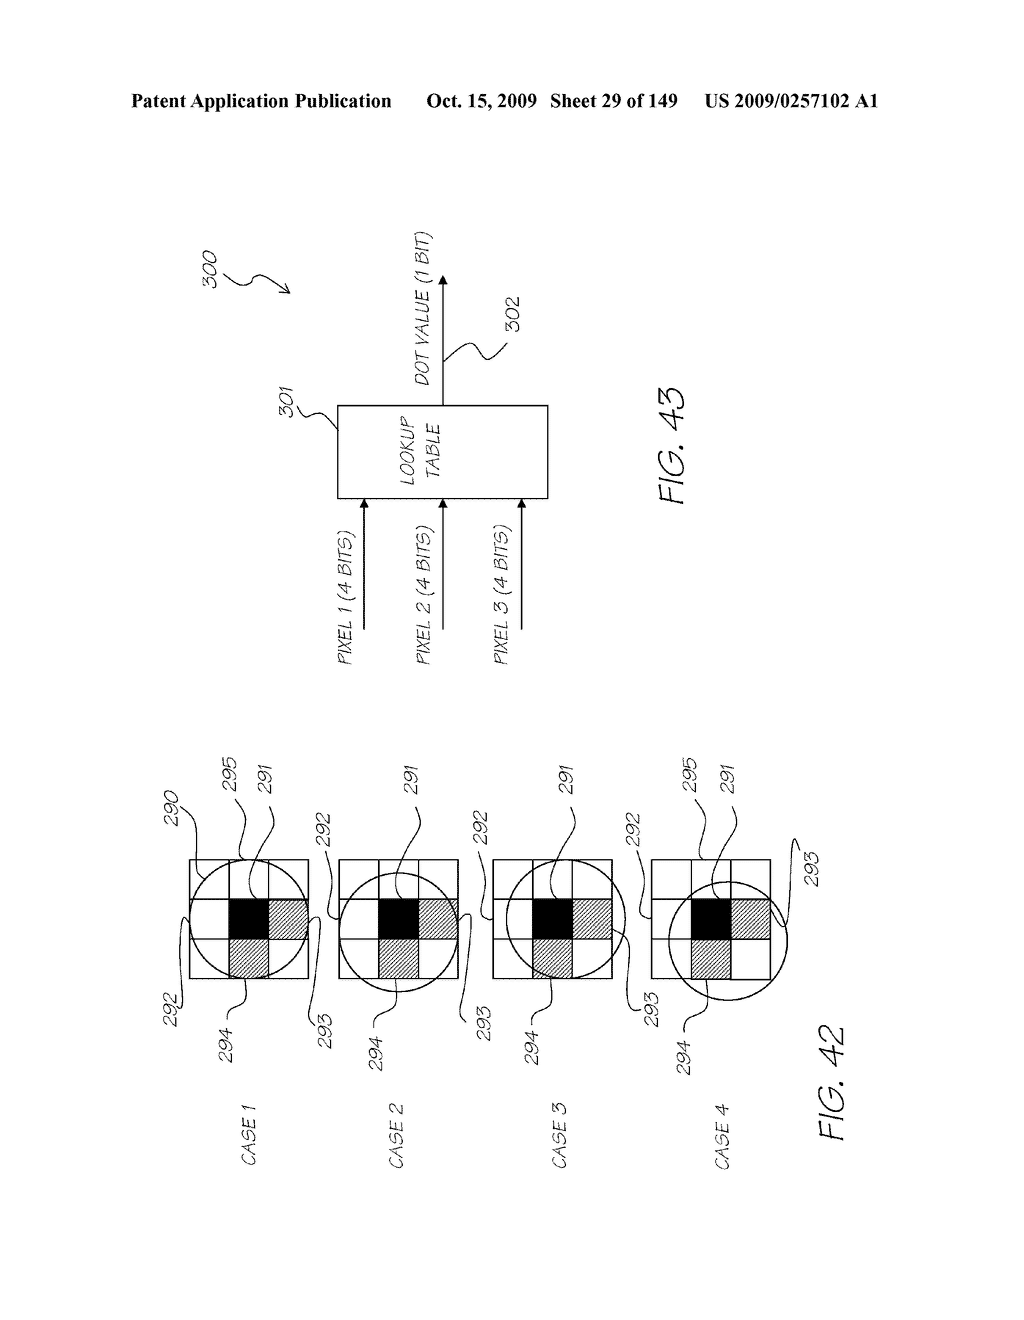 IMAGE PROCESSING APPARATUS HAVING CARD READER FOR APPLYING EFFECTS STORED ON A CARD TO A STORED IMAGE - diagram, schematic, and image 30